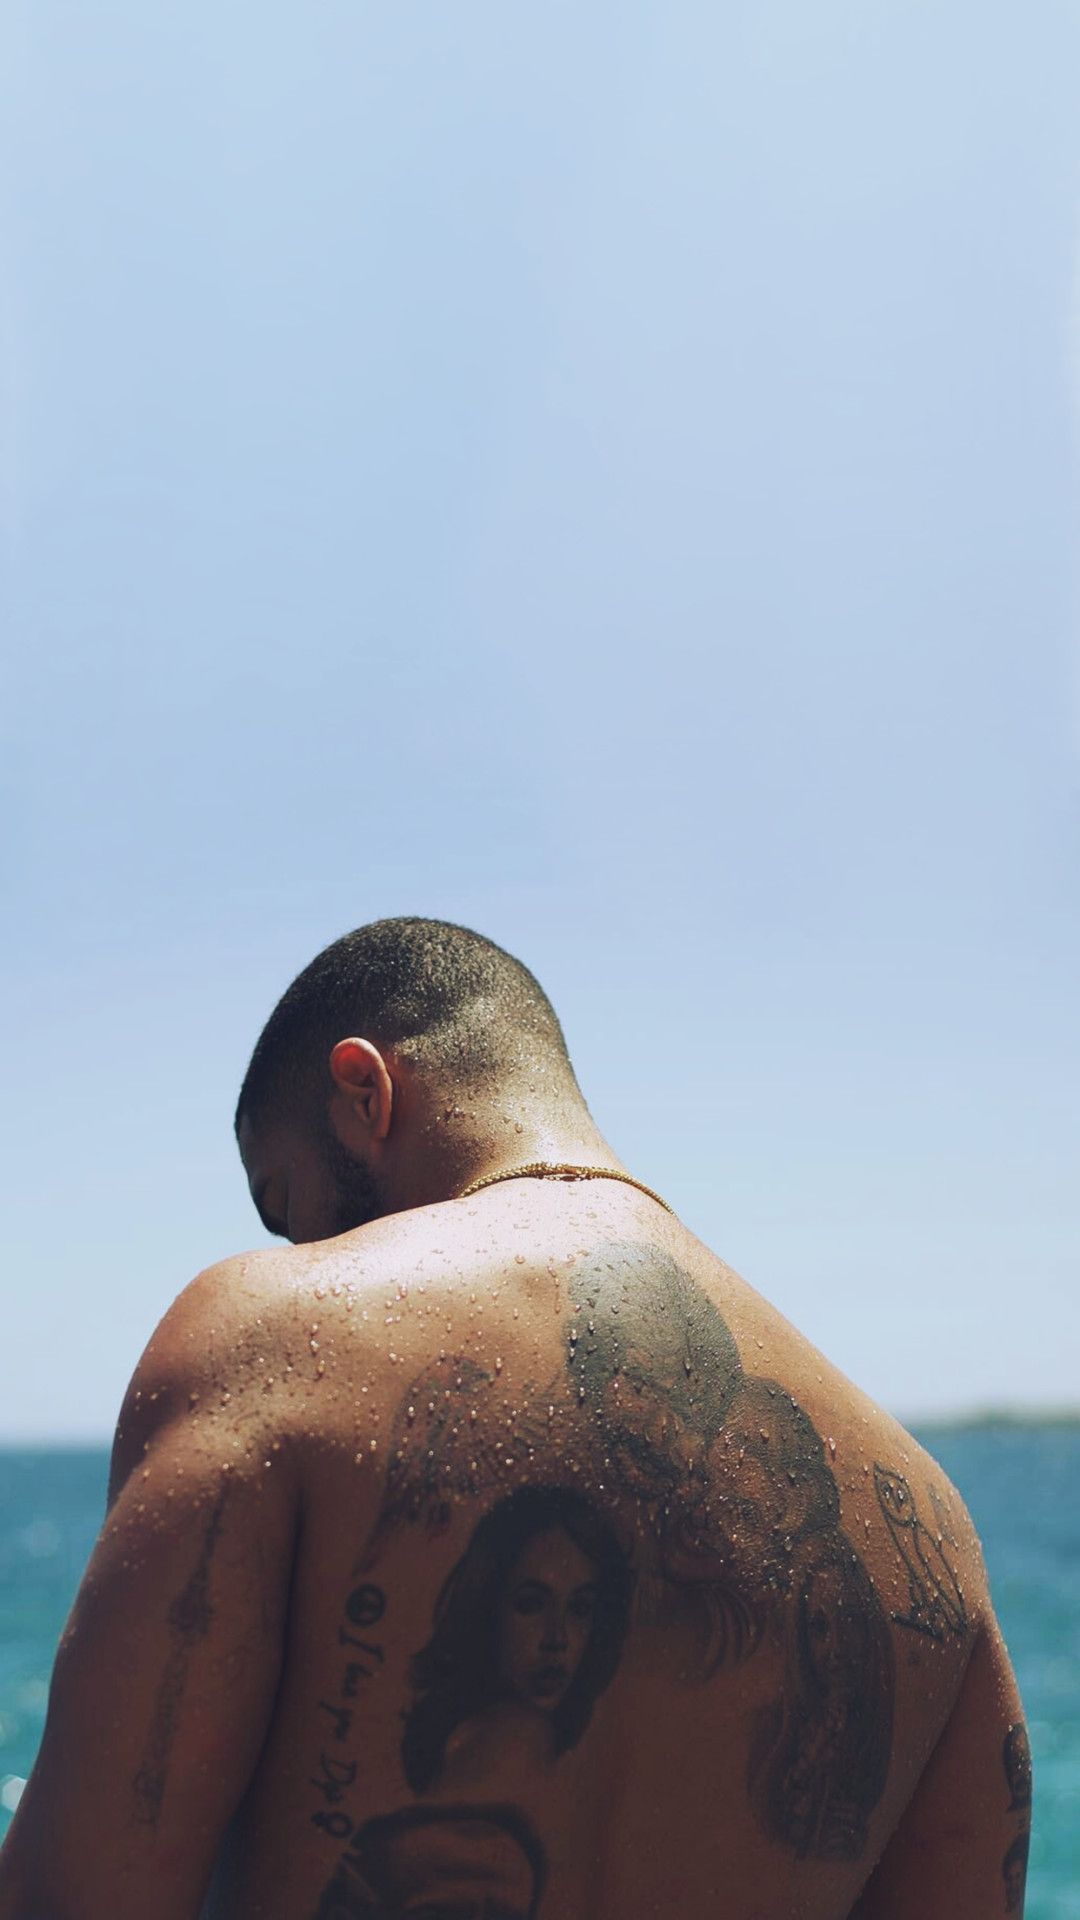 A man with tattoos on his back standing on the beach - Drake